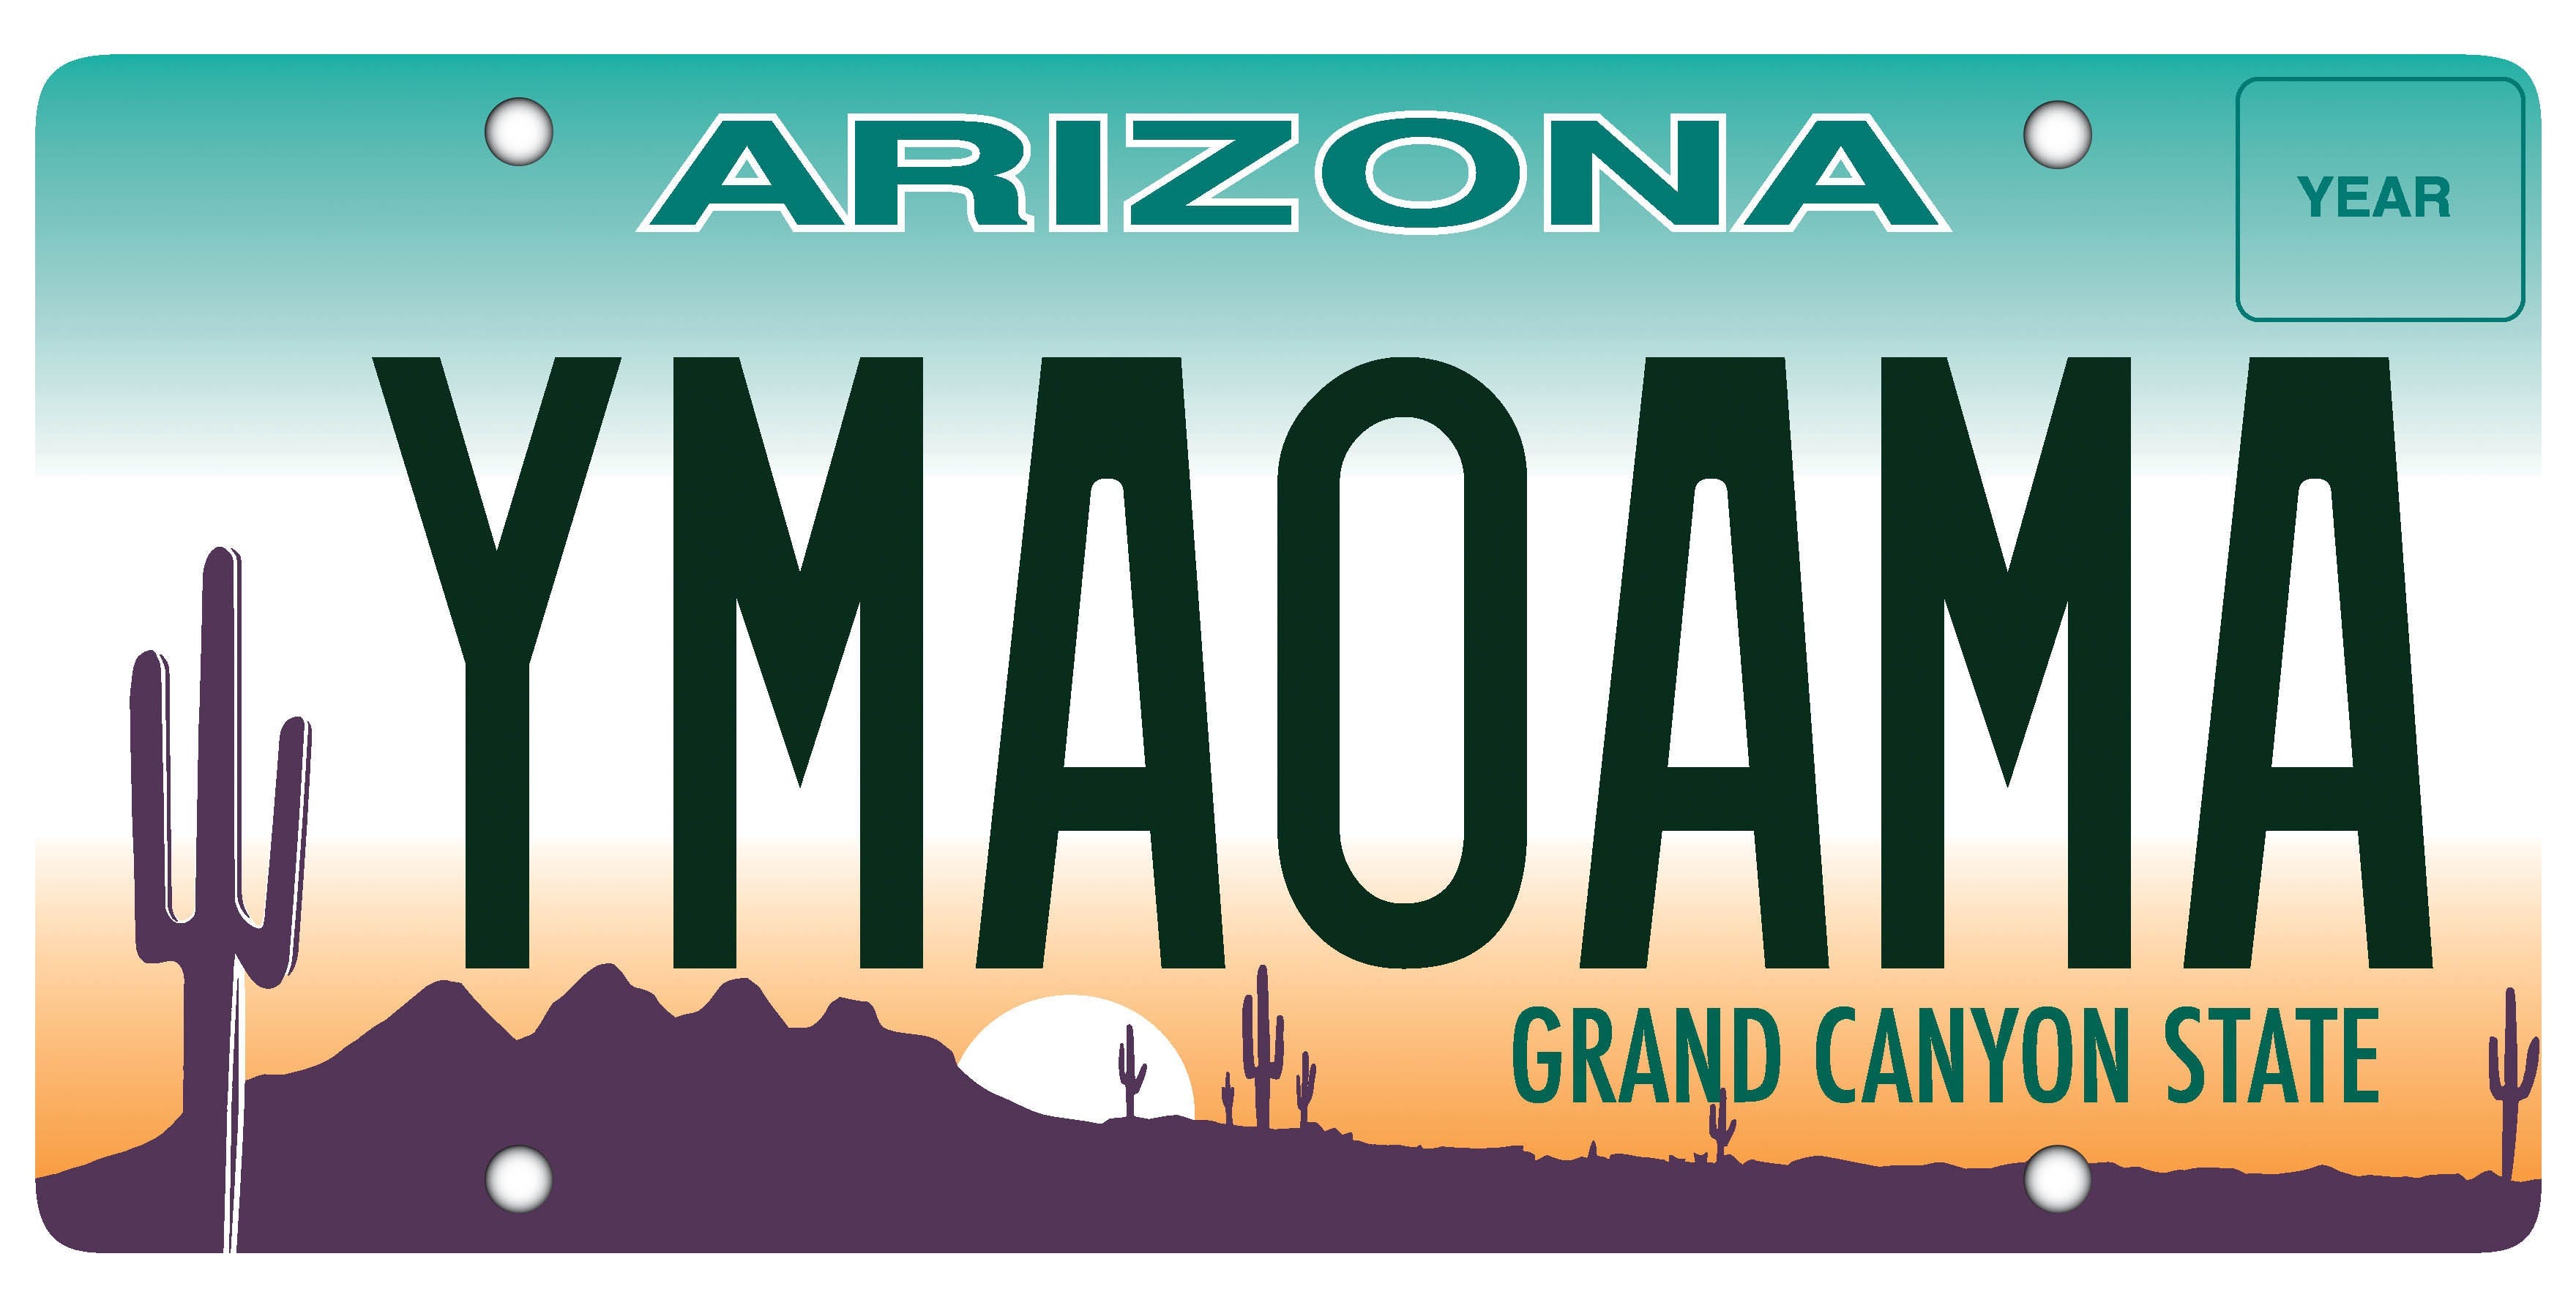 Arizona Changes License Plate Format To Expand Options For Drivers